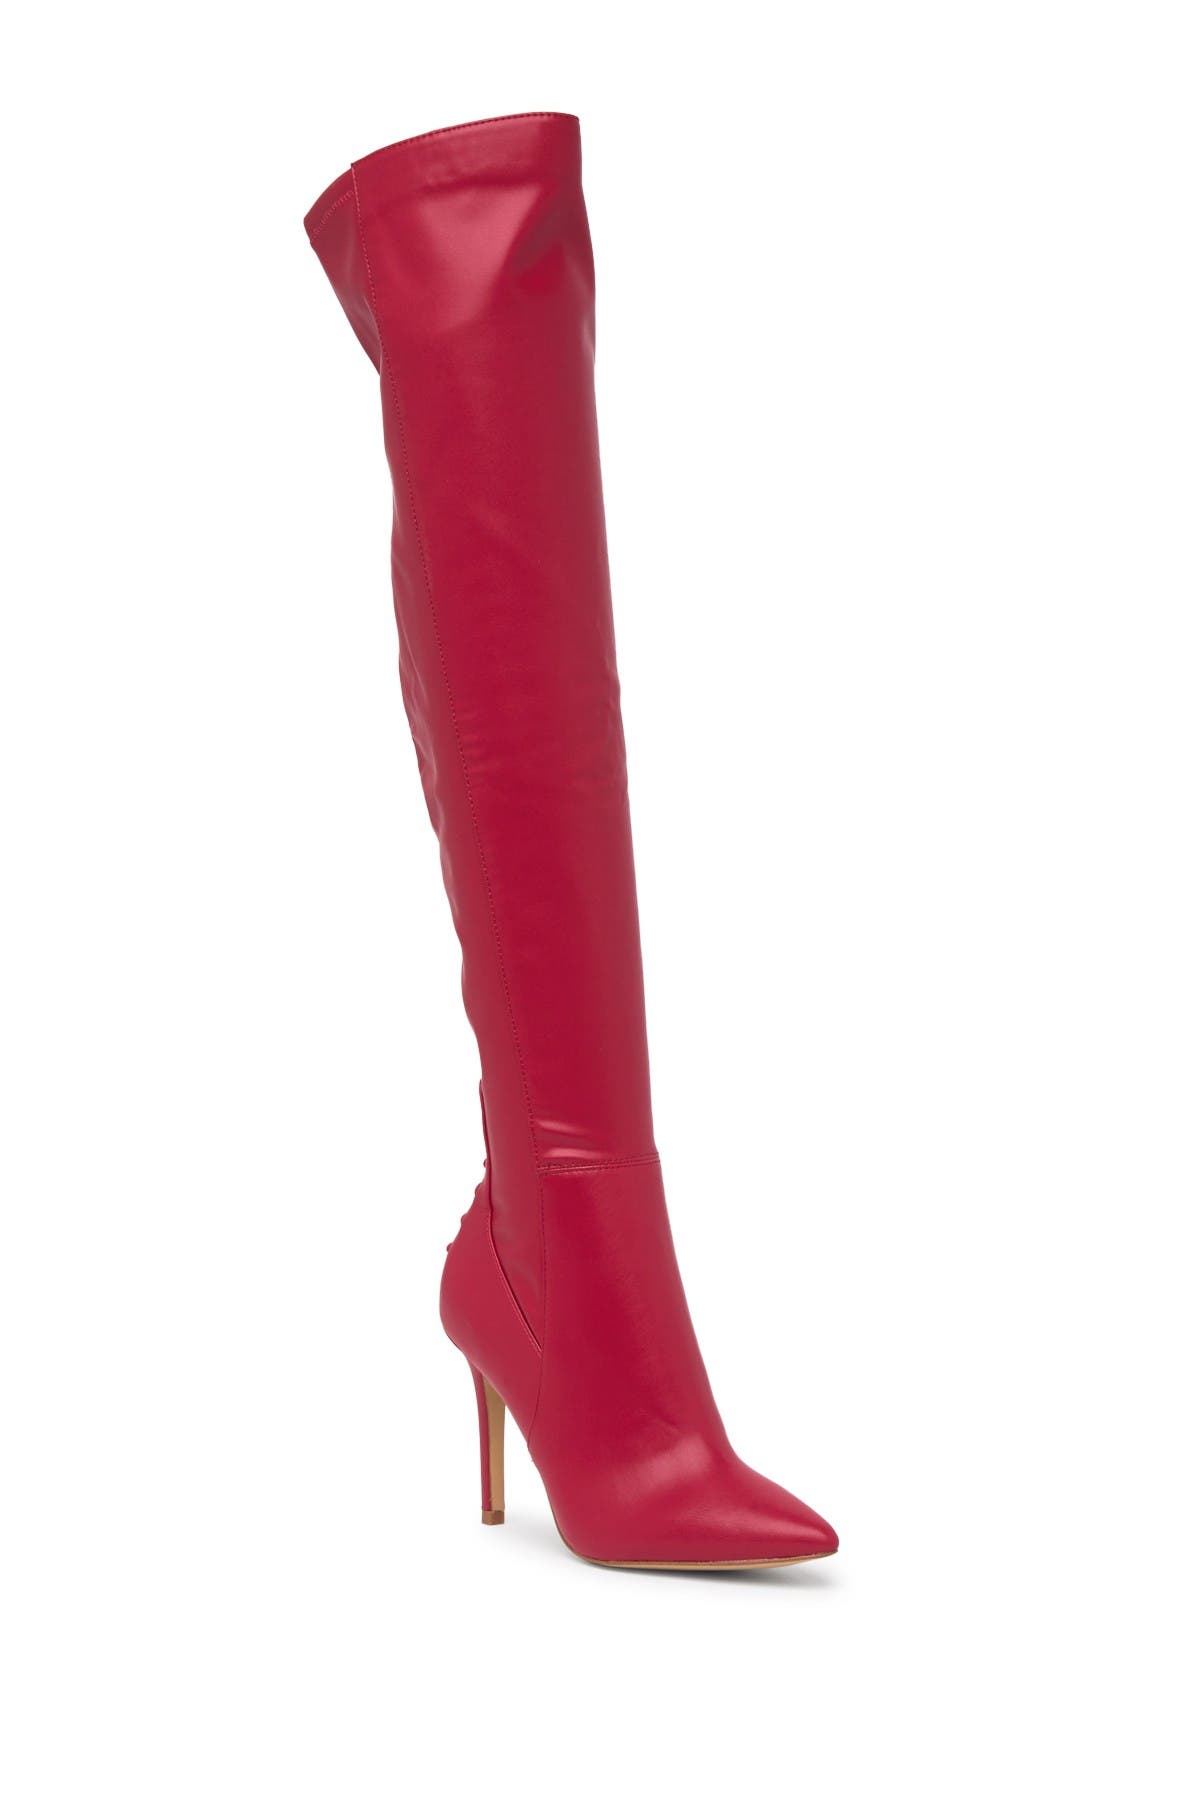 aldo red thigh high boots